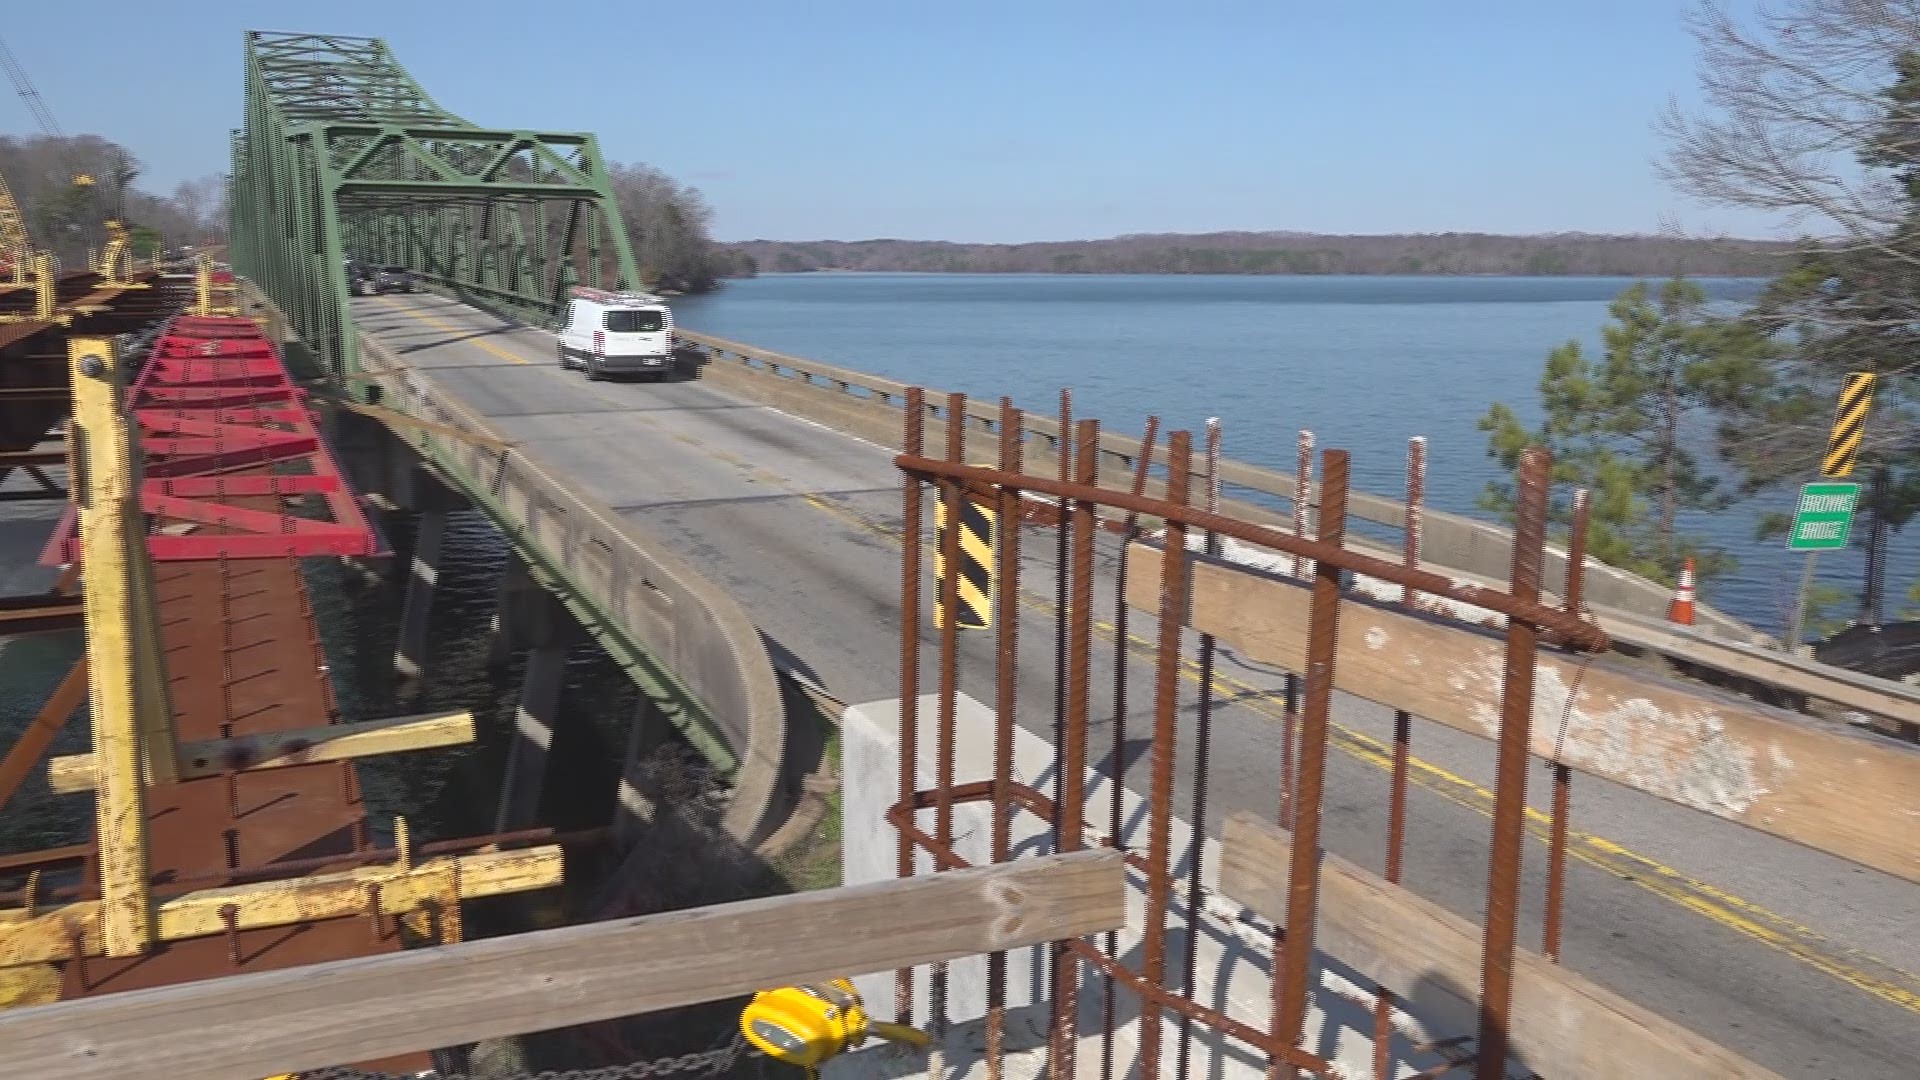 After more than 70 years of traffic, one of the original bridges to cross over Lake Lanier is finally being replaced.